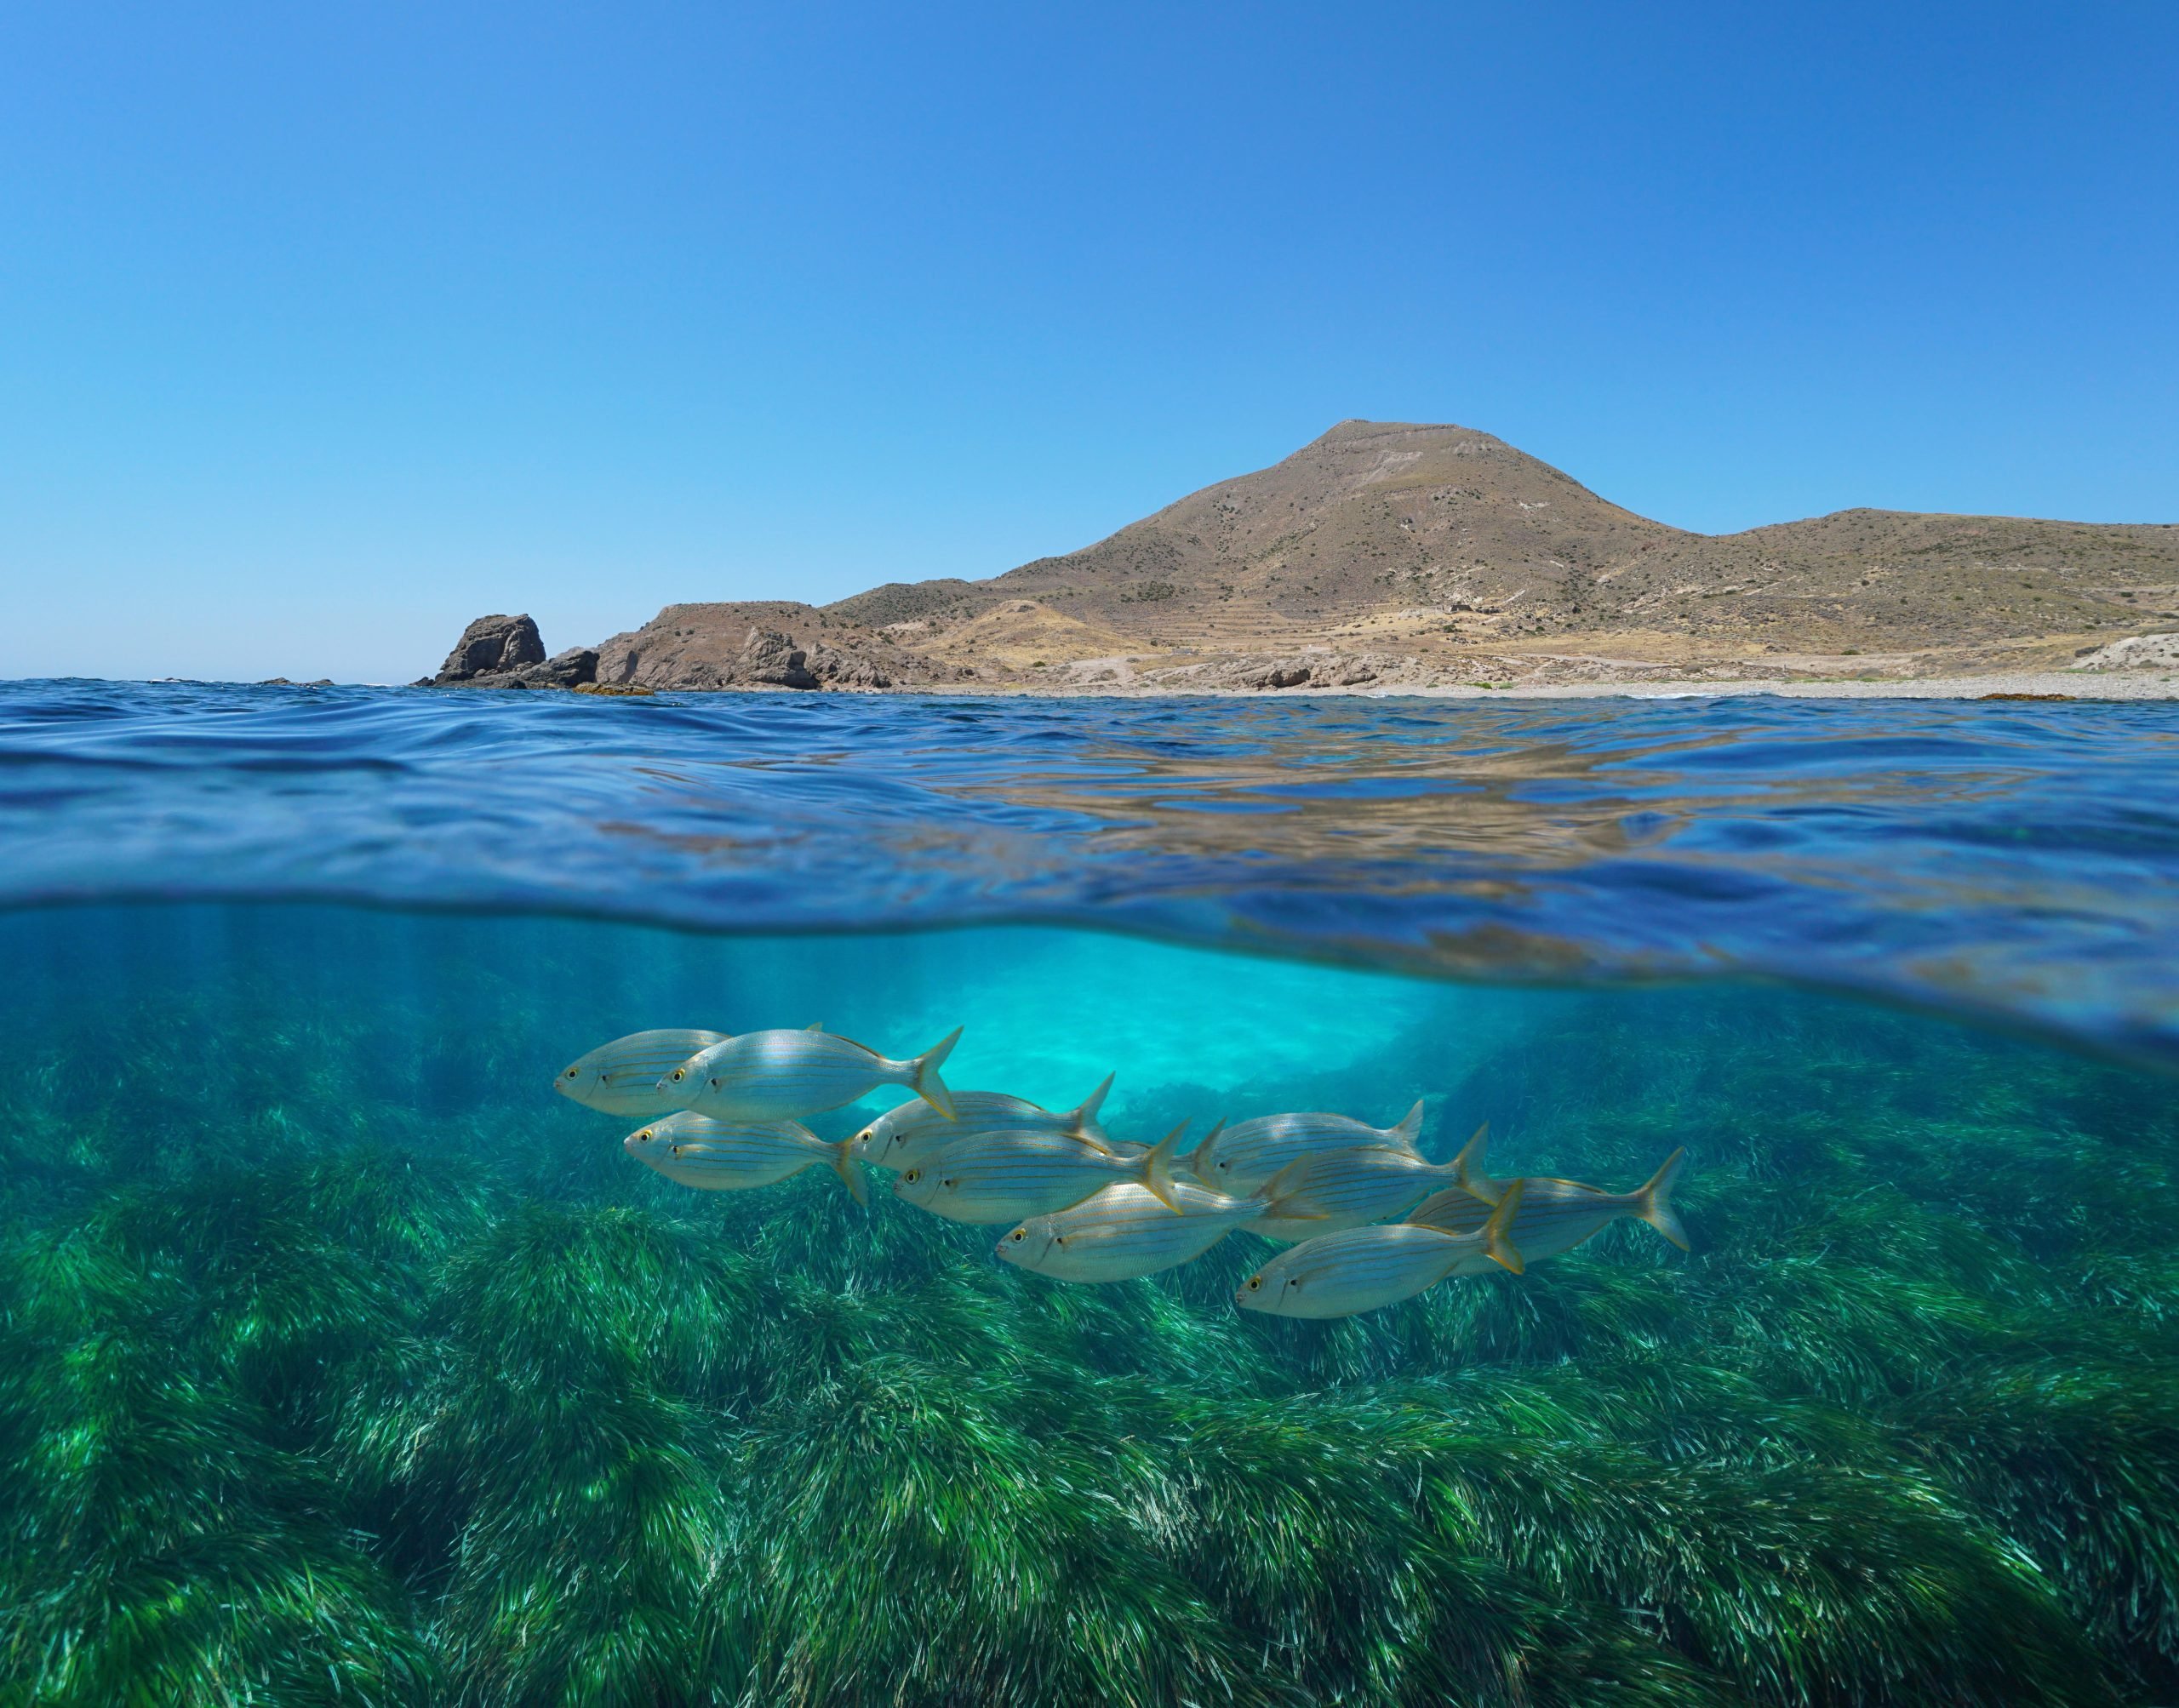 <p>Seabed grass and fish in the Mediterranean Sea in Andalusia, Spain. Seabed meadows are one of the coastal ecosystems valued for their ability to capture carbon and their potential to mitigate climate change. (Image: Seaphotoart/Alamy)</p>